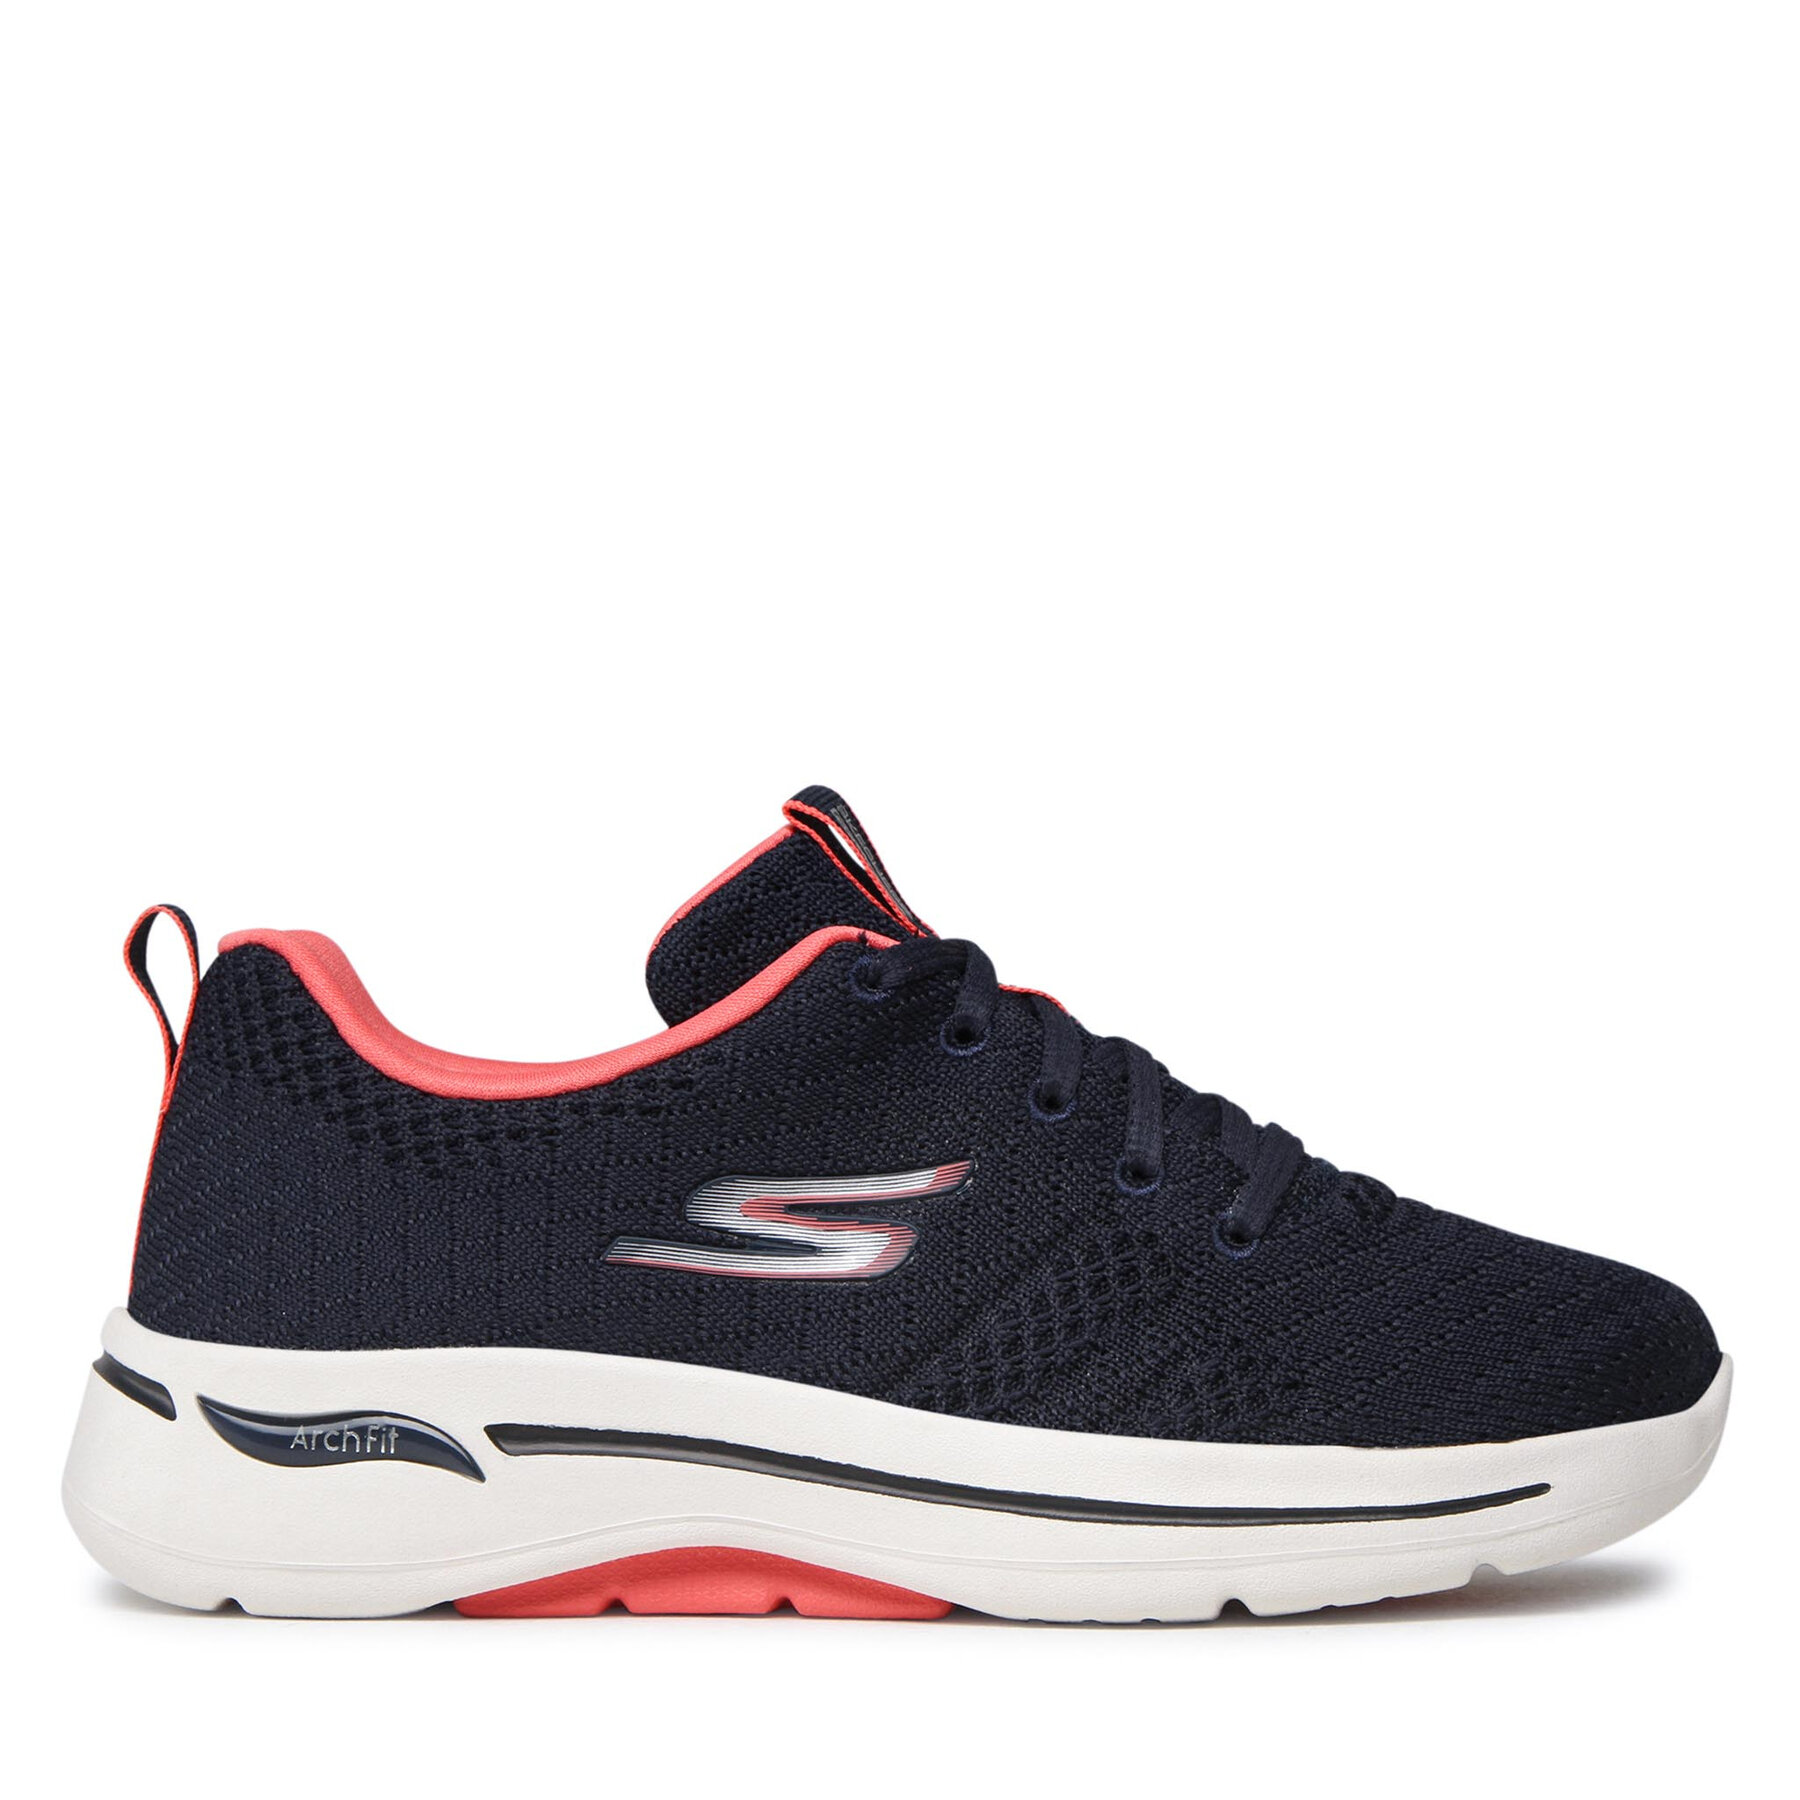 Sneakers Skechers Unify 124403/NVCL Navy/Coral von Skechers